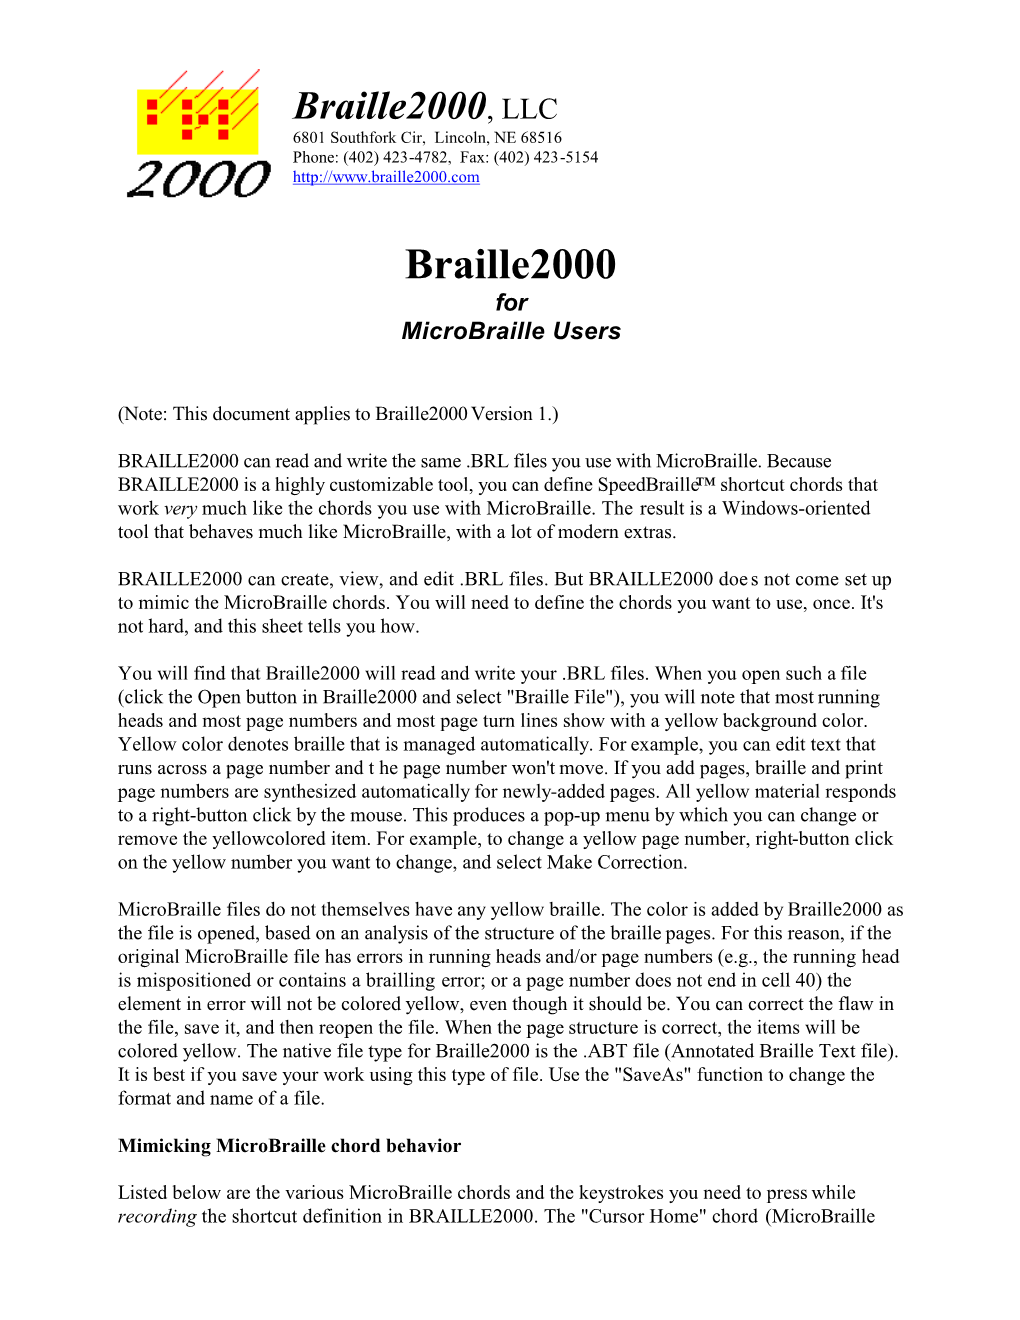 Braille2000 for Microbraille Users